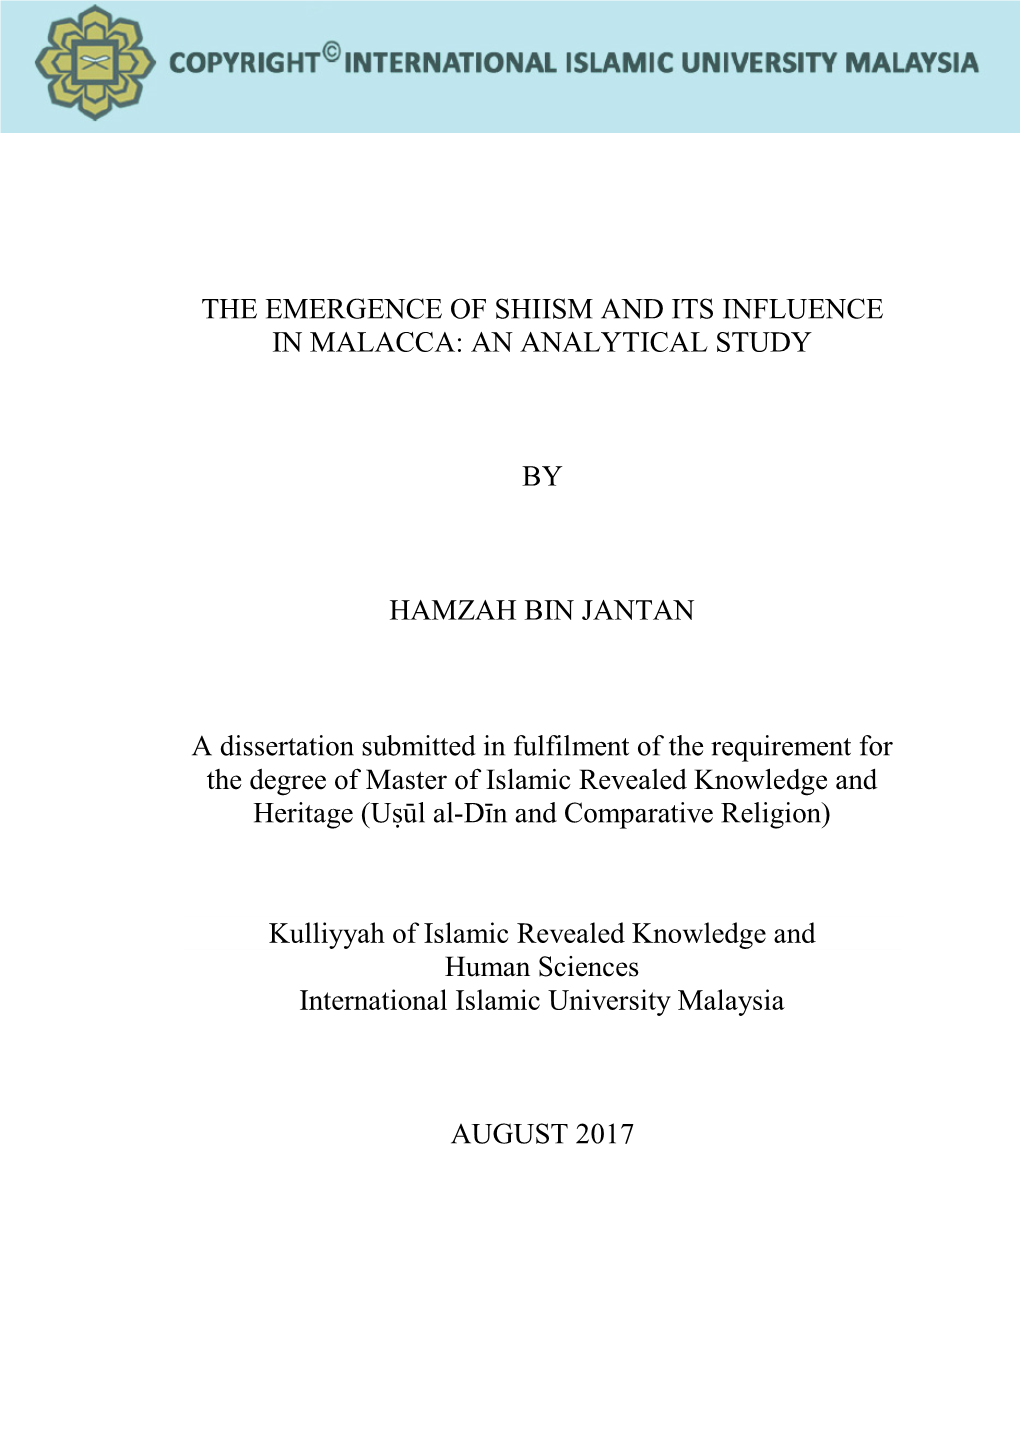 The Emergence of Shiism and Its Influence in Malacca: an Analytical Study